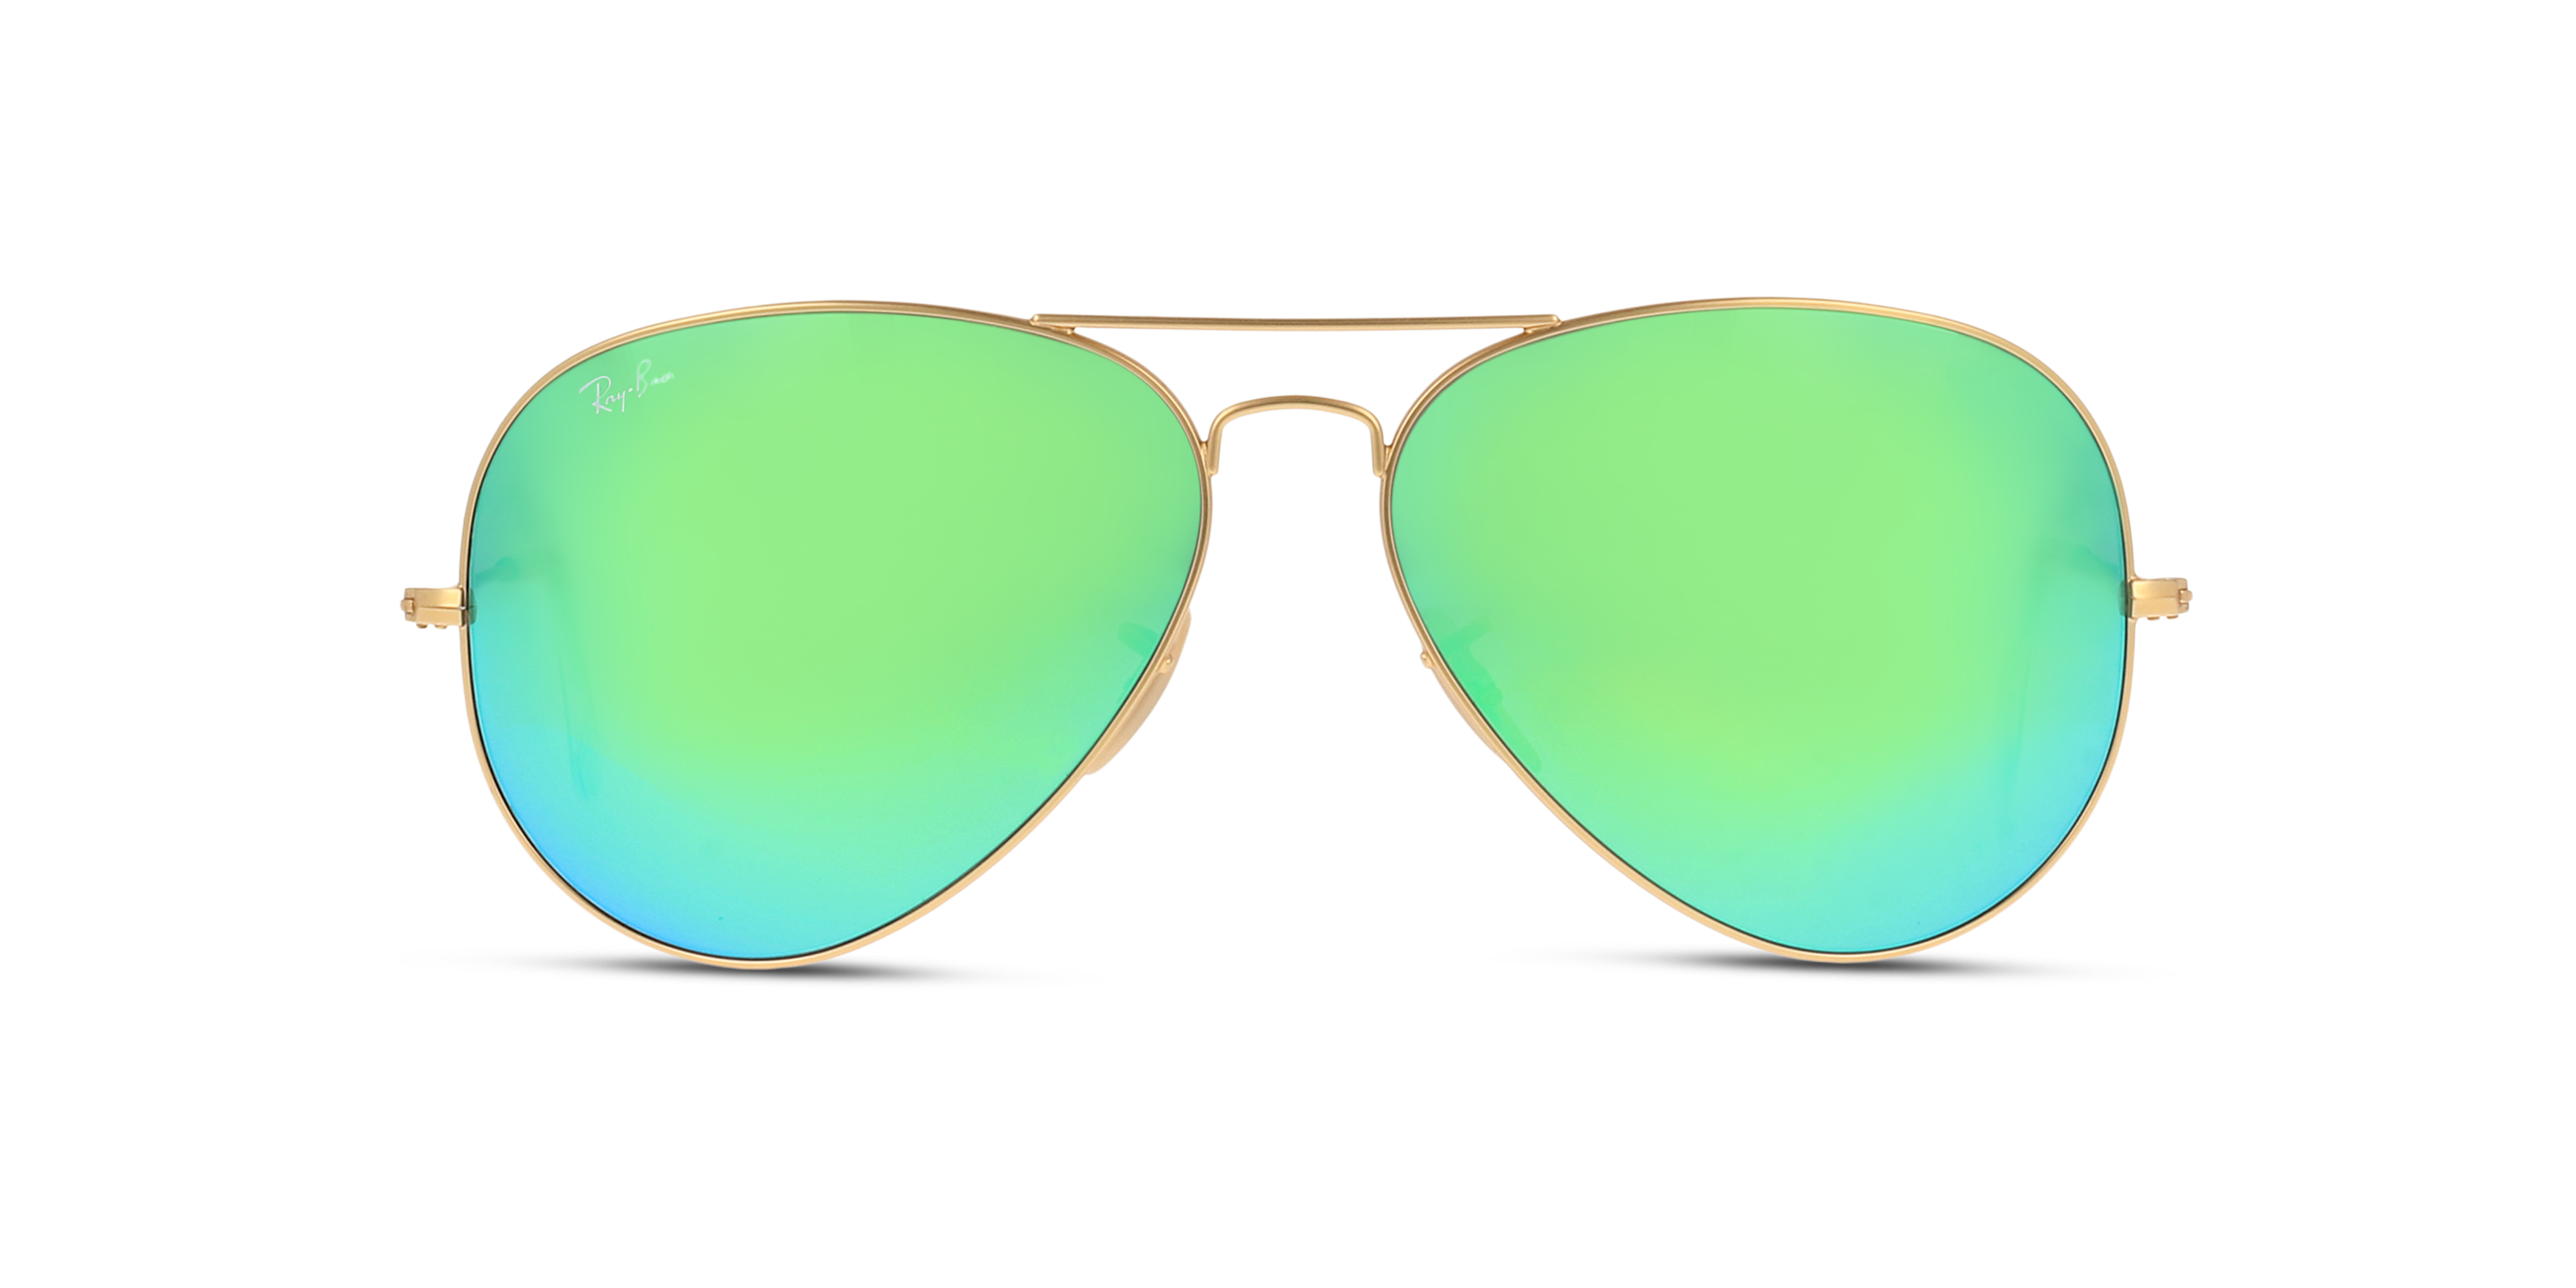 [products.image.front] Ray-Ban Aviator Flash Lenses RB3025 112/19